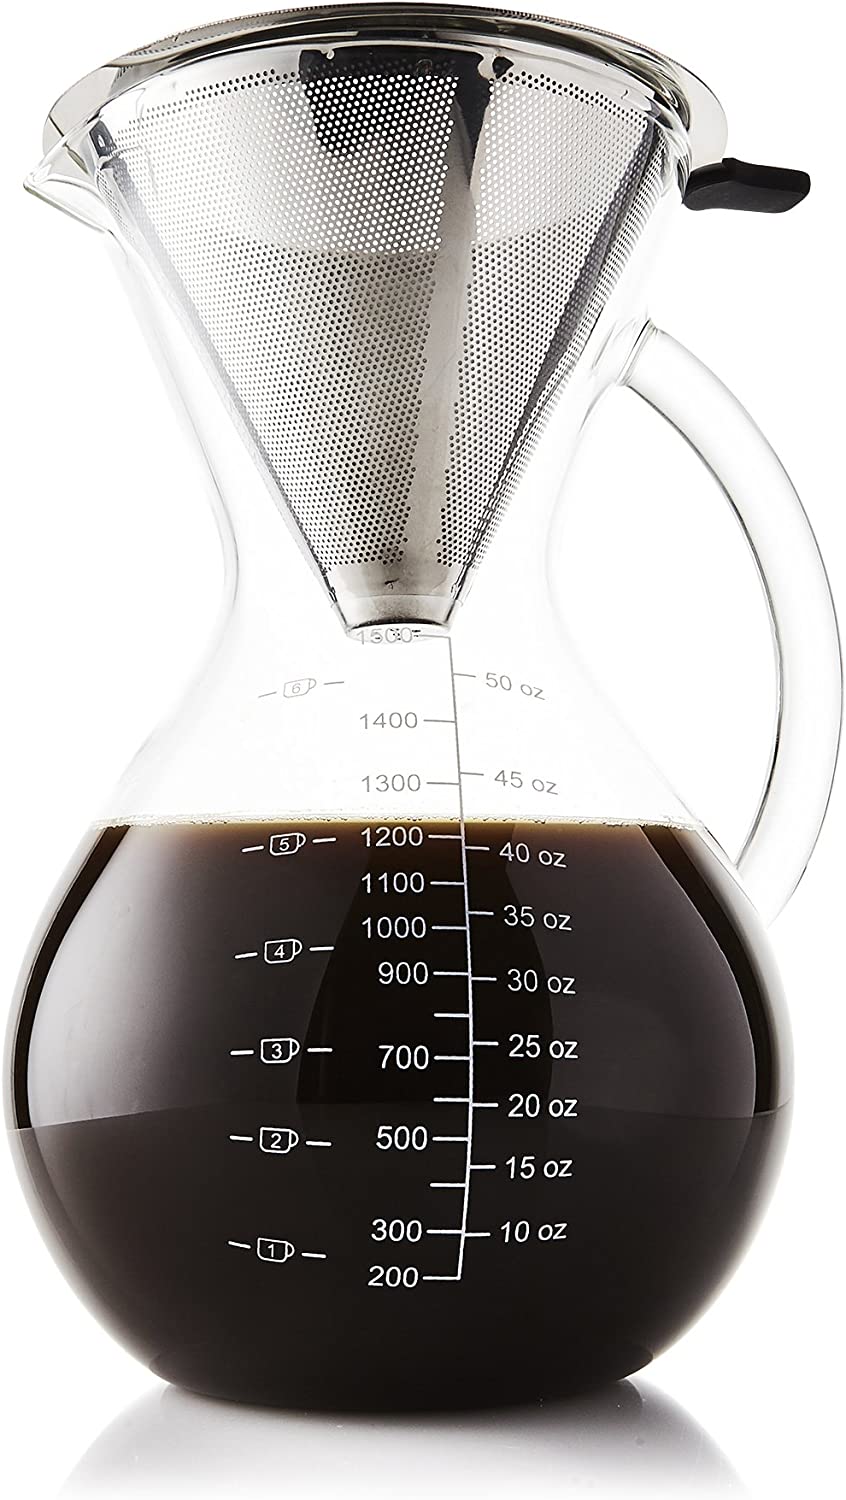 Apace Living SultryBrew Pour Over Coffee Maker with Coffee Shovel and Cork Lid Elegant Hand Filter for Filter Coffee with Glass Carafe and Permanent Filter Made of Stainless Steel (1500 ml)